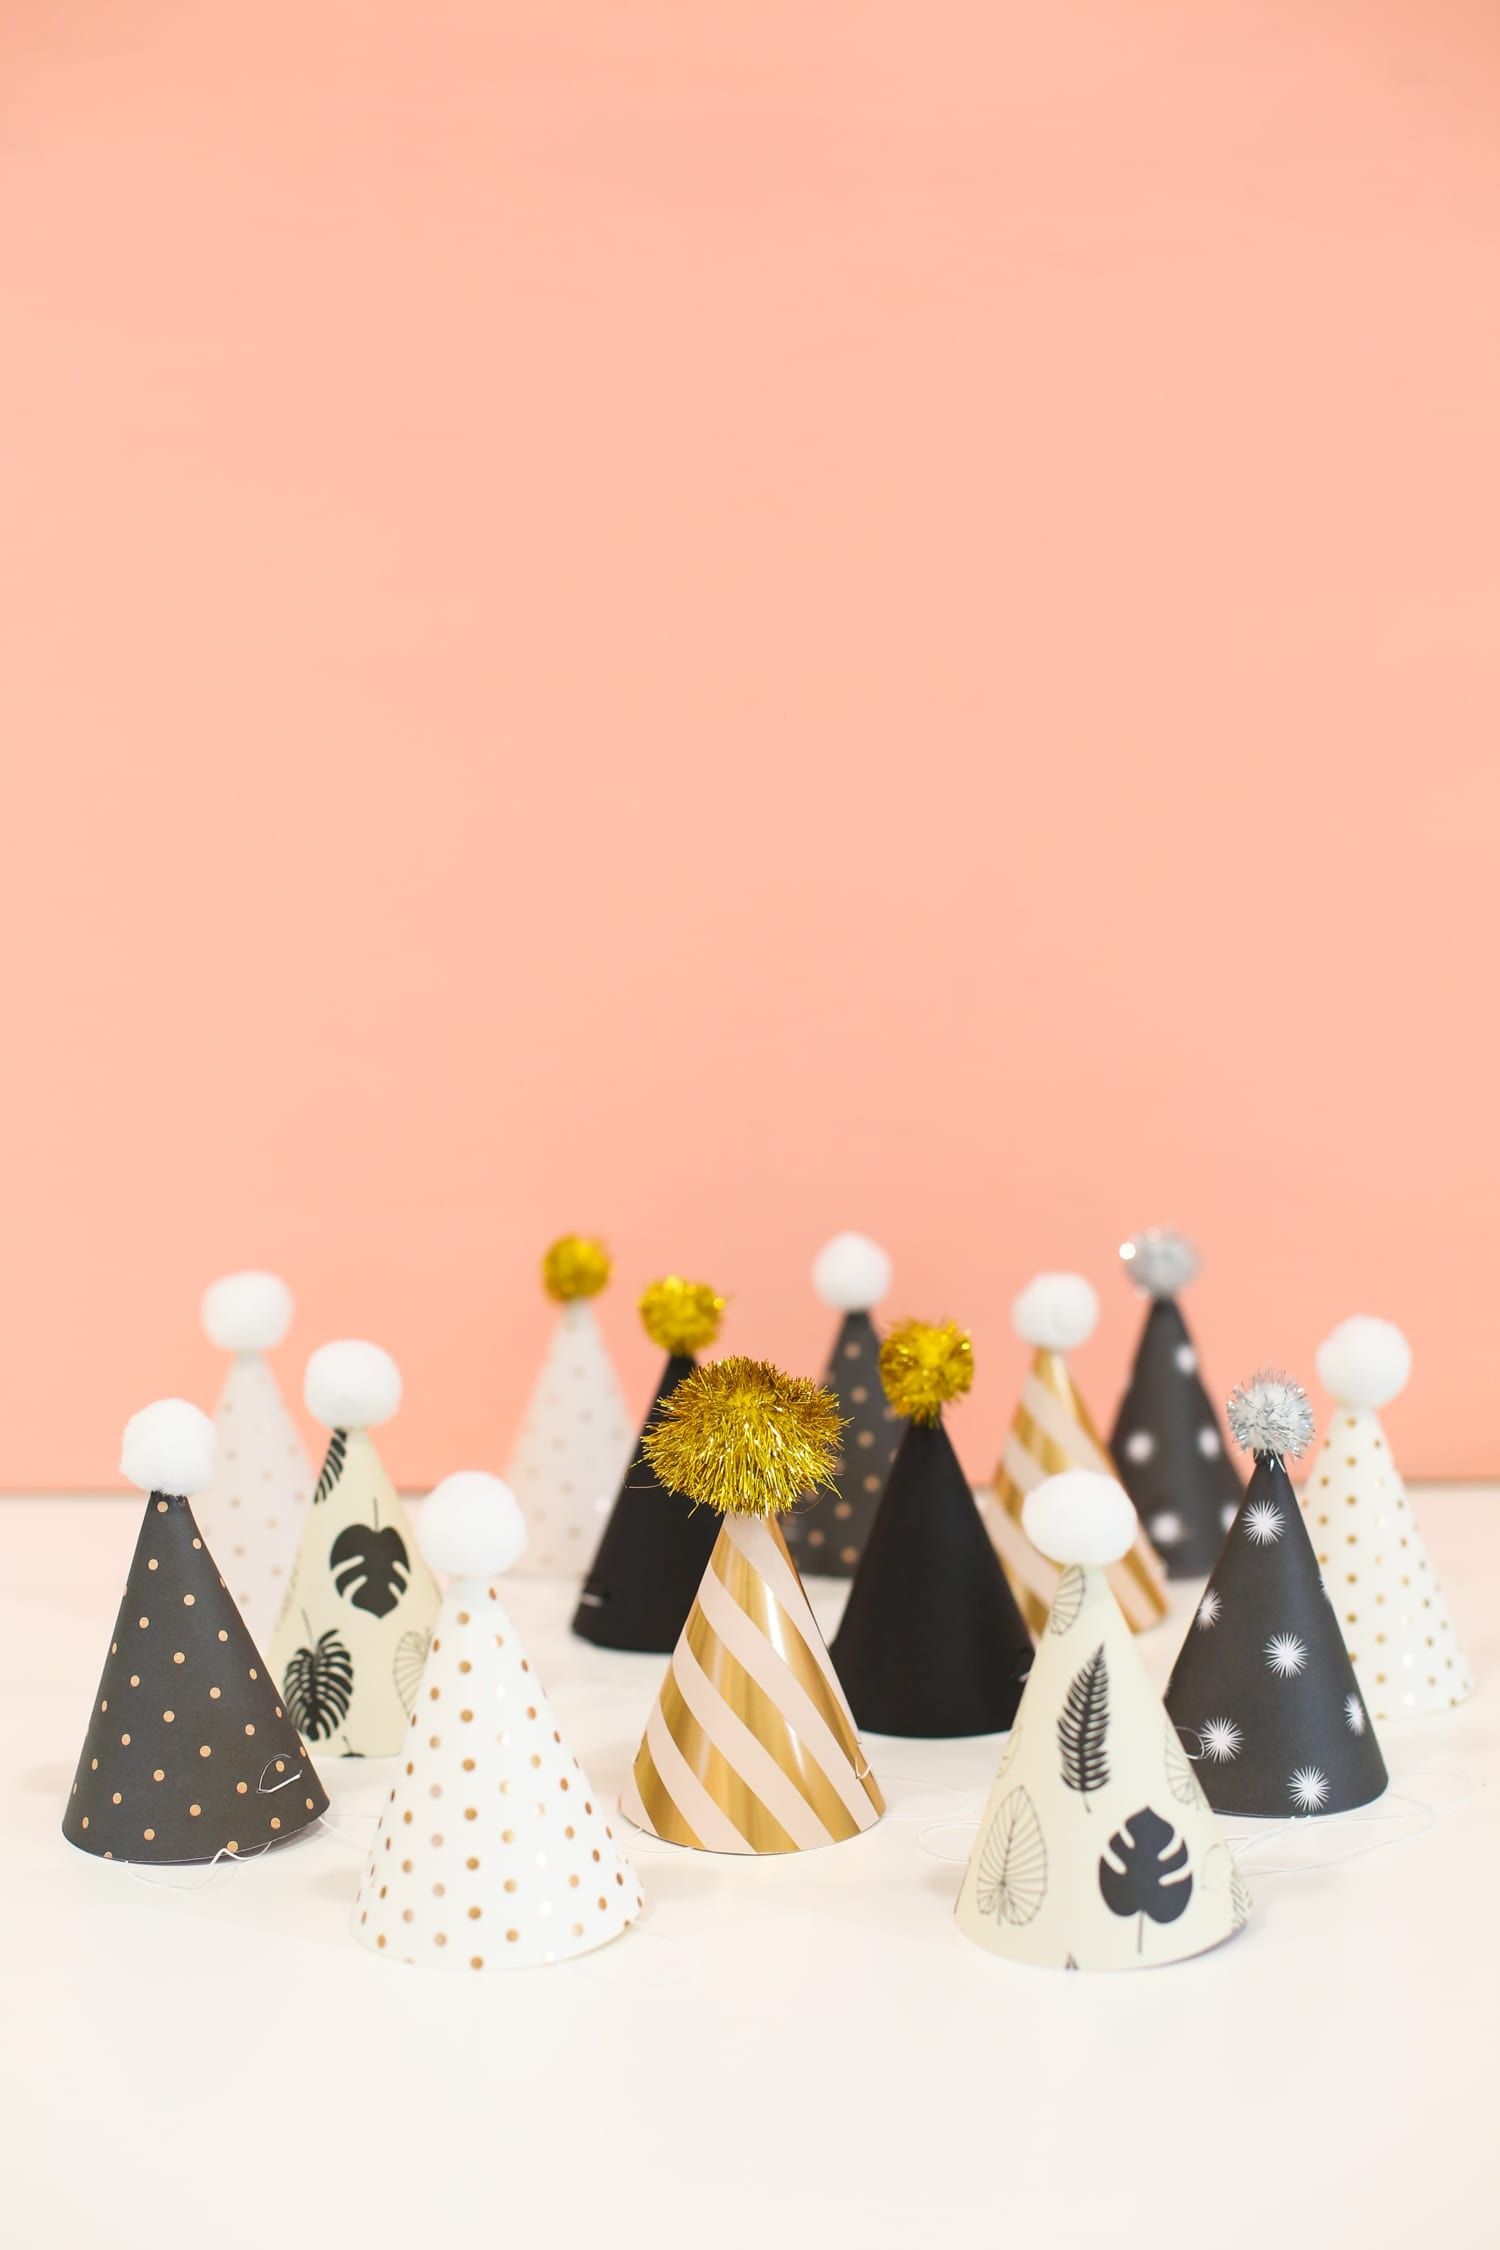 8 Simple and Gorgeous New Year's Party Craft Ideas